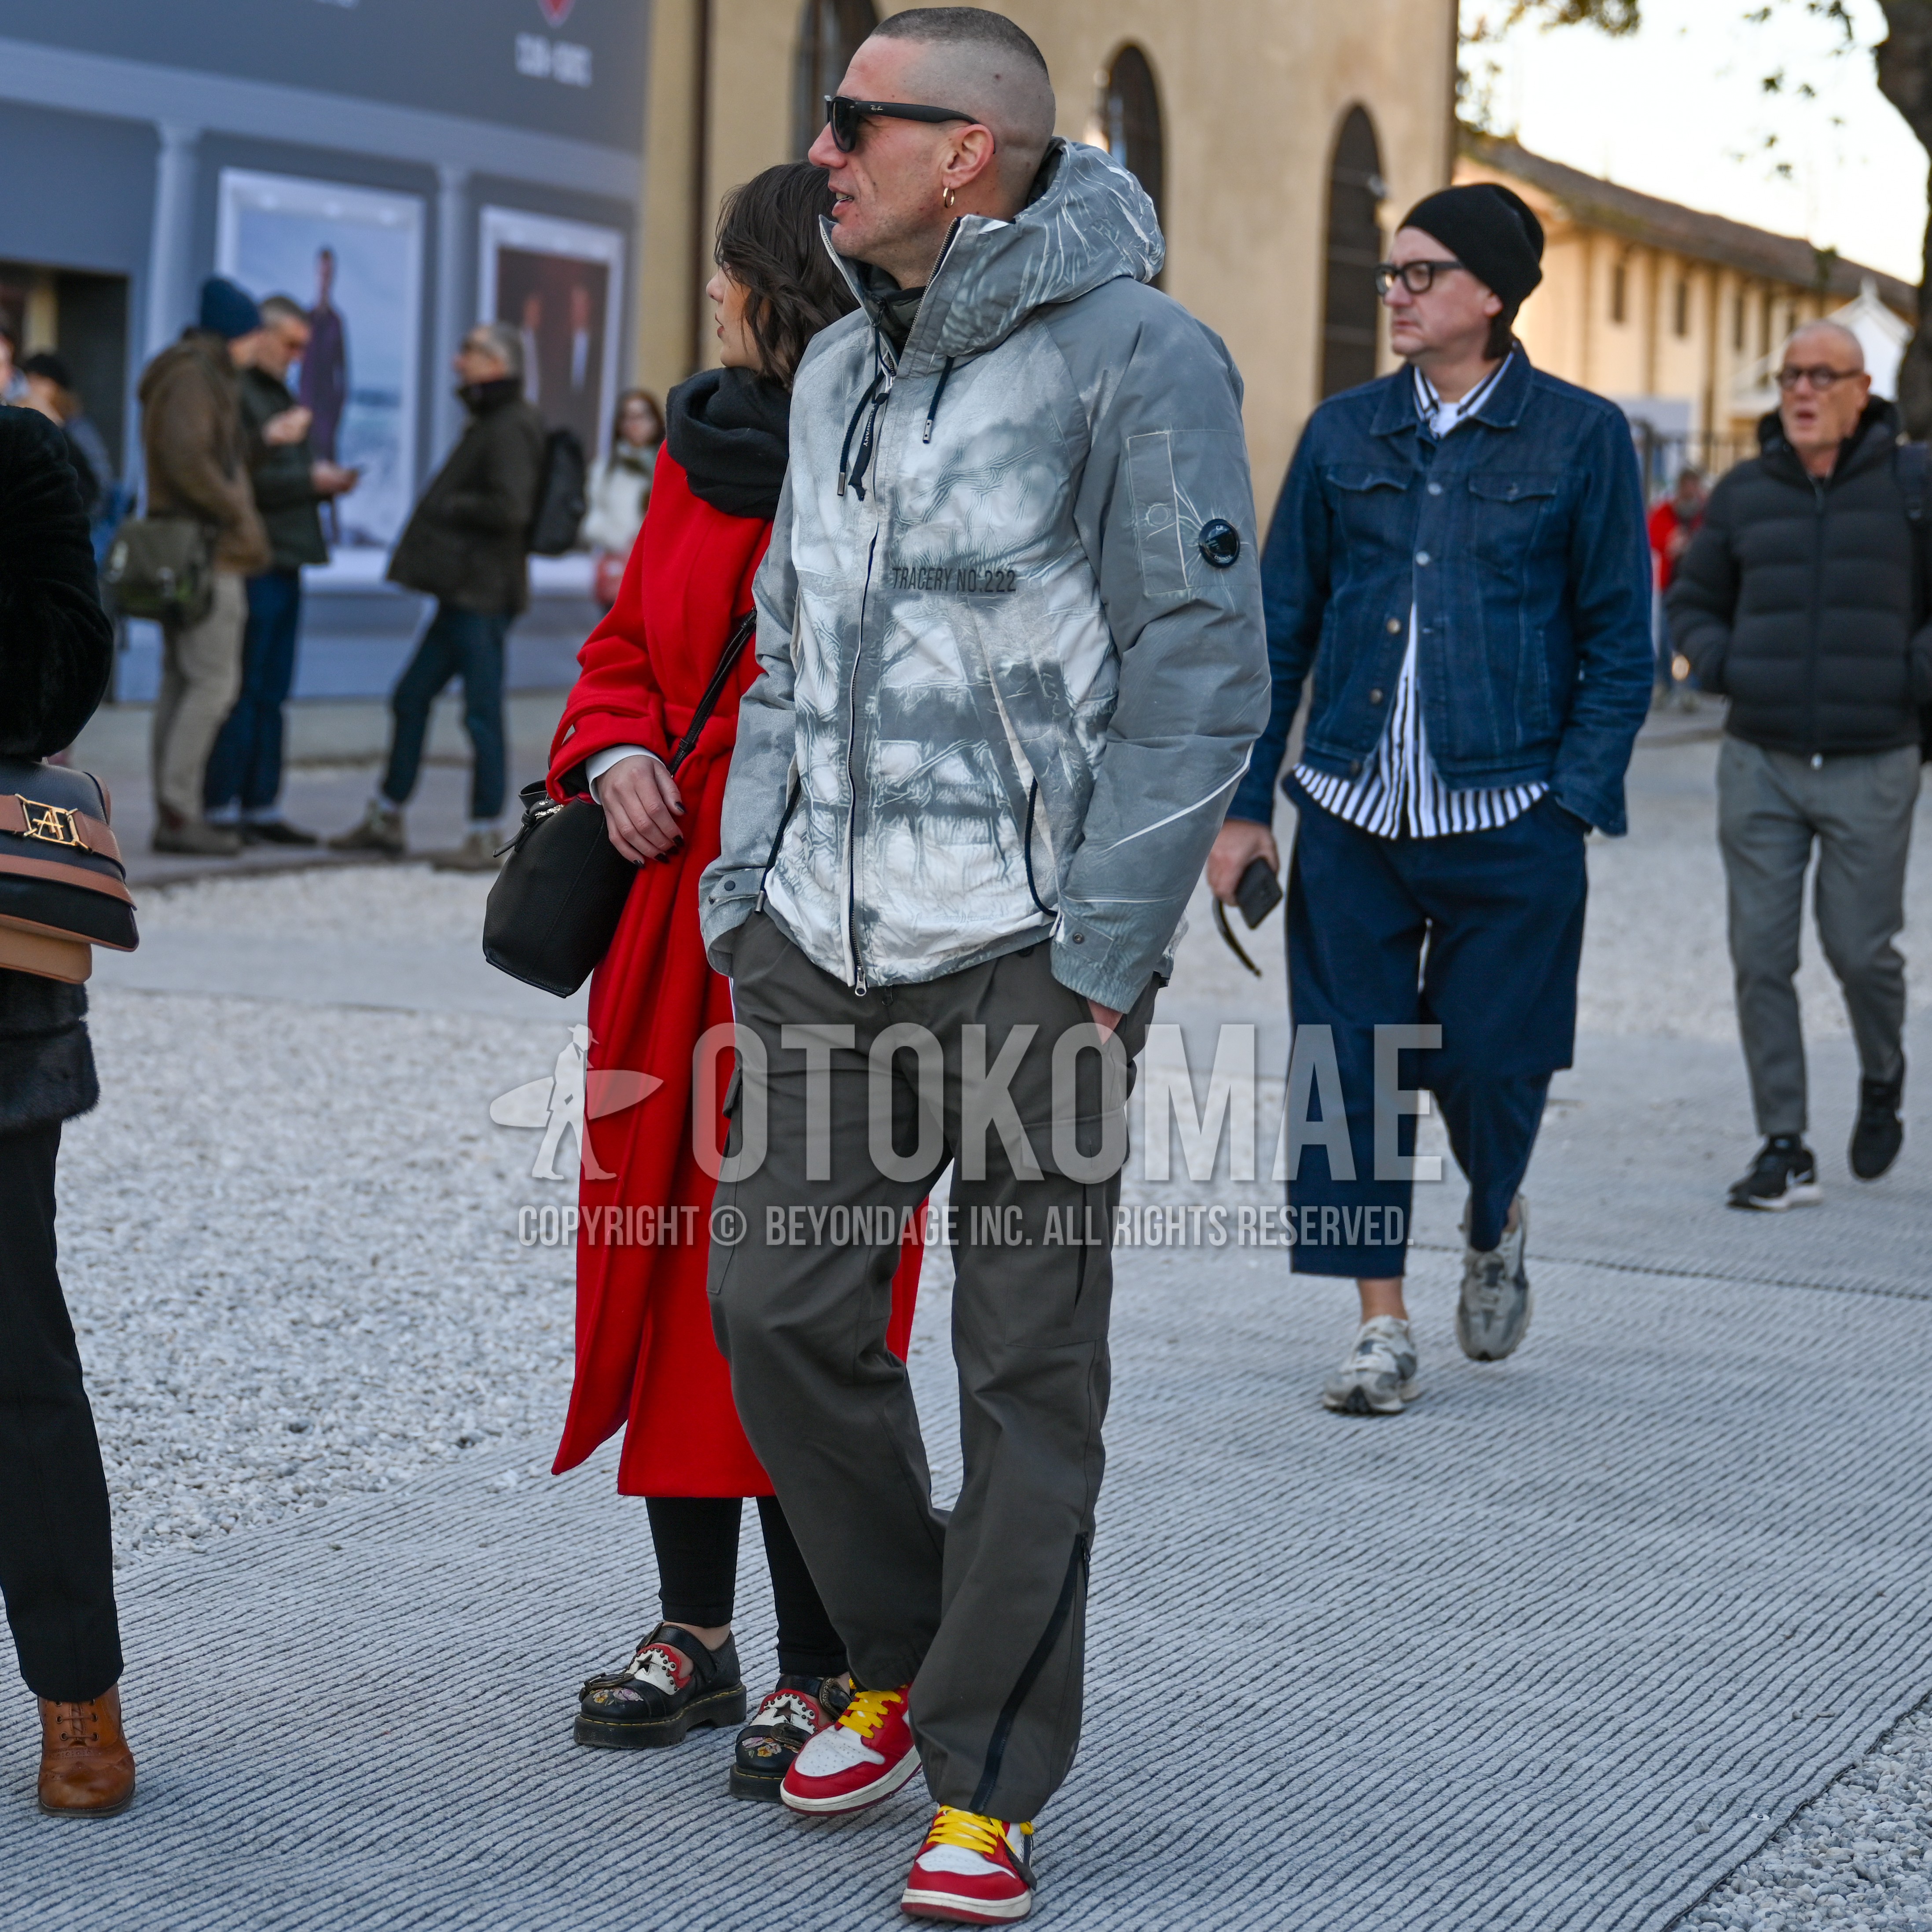 Men's spring autumn winter outfit with black plain sunglasses, gray white outerwear mountain parka, gray plain cargo pants, red yellow white low-cut sneakers.